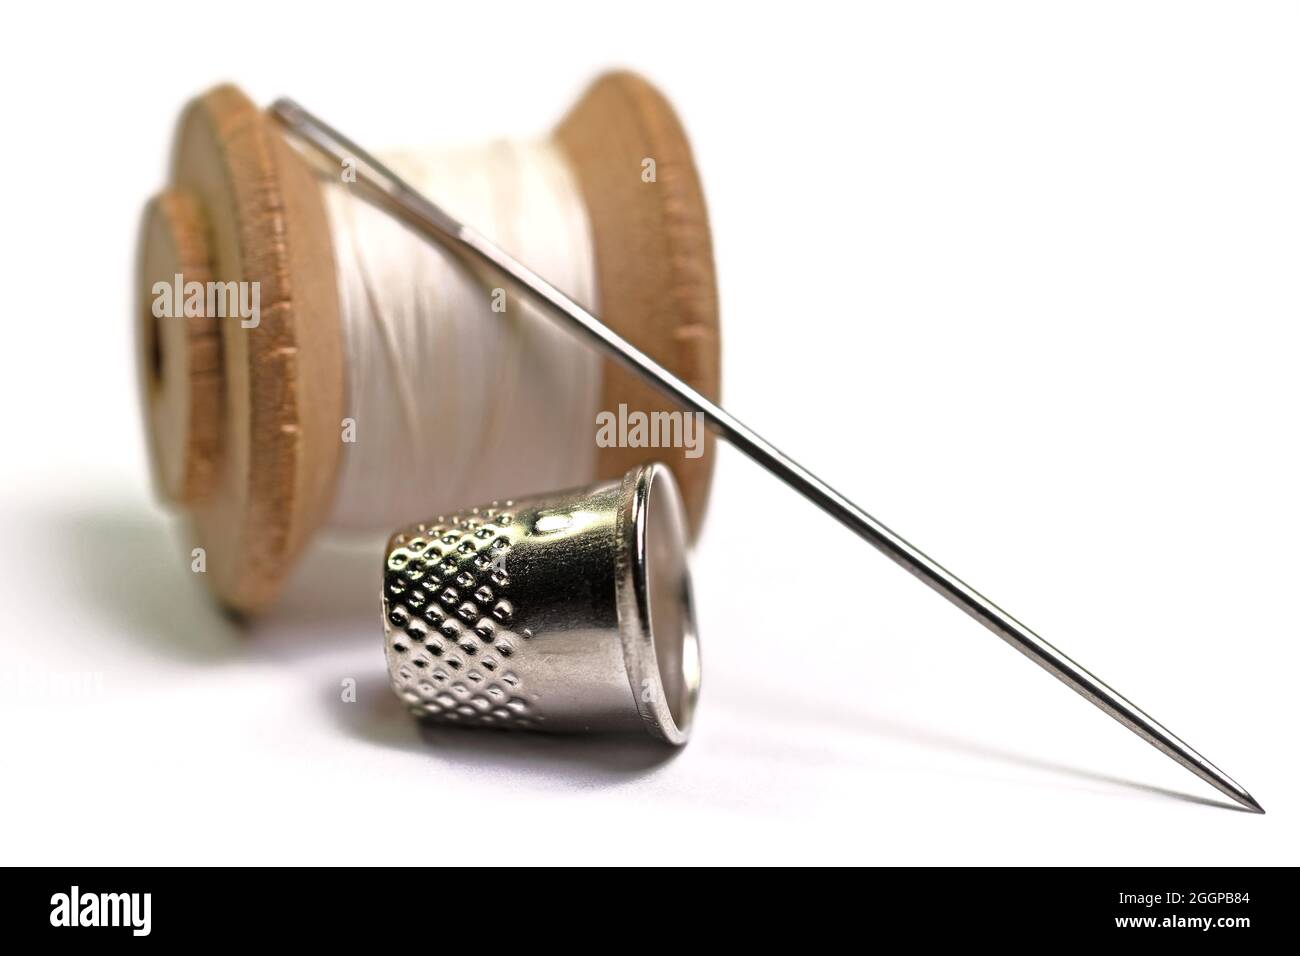 Thimble, sewing needle and thread against white background Stock Photo